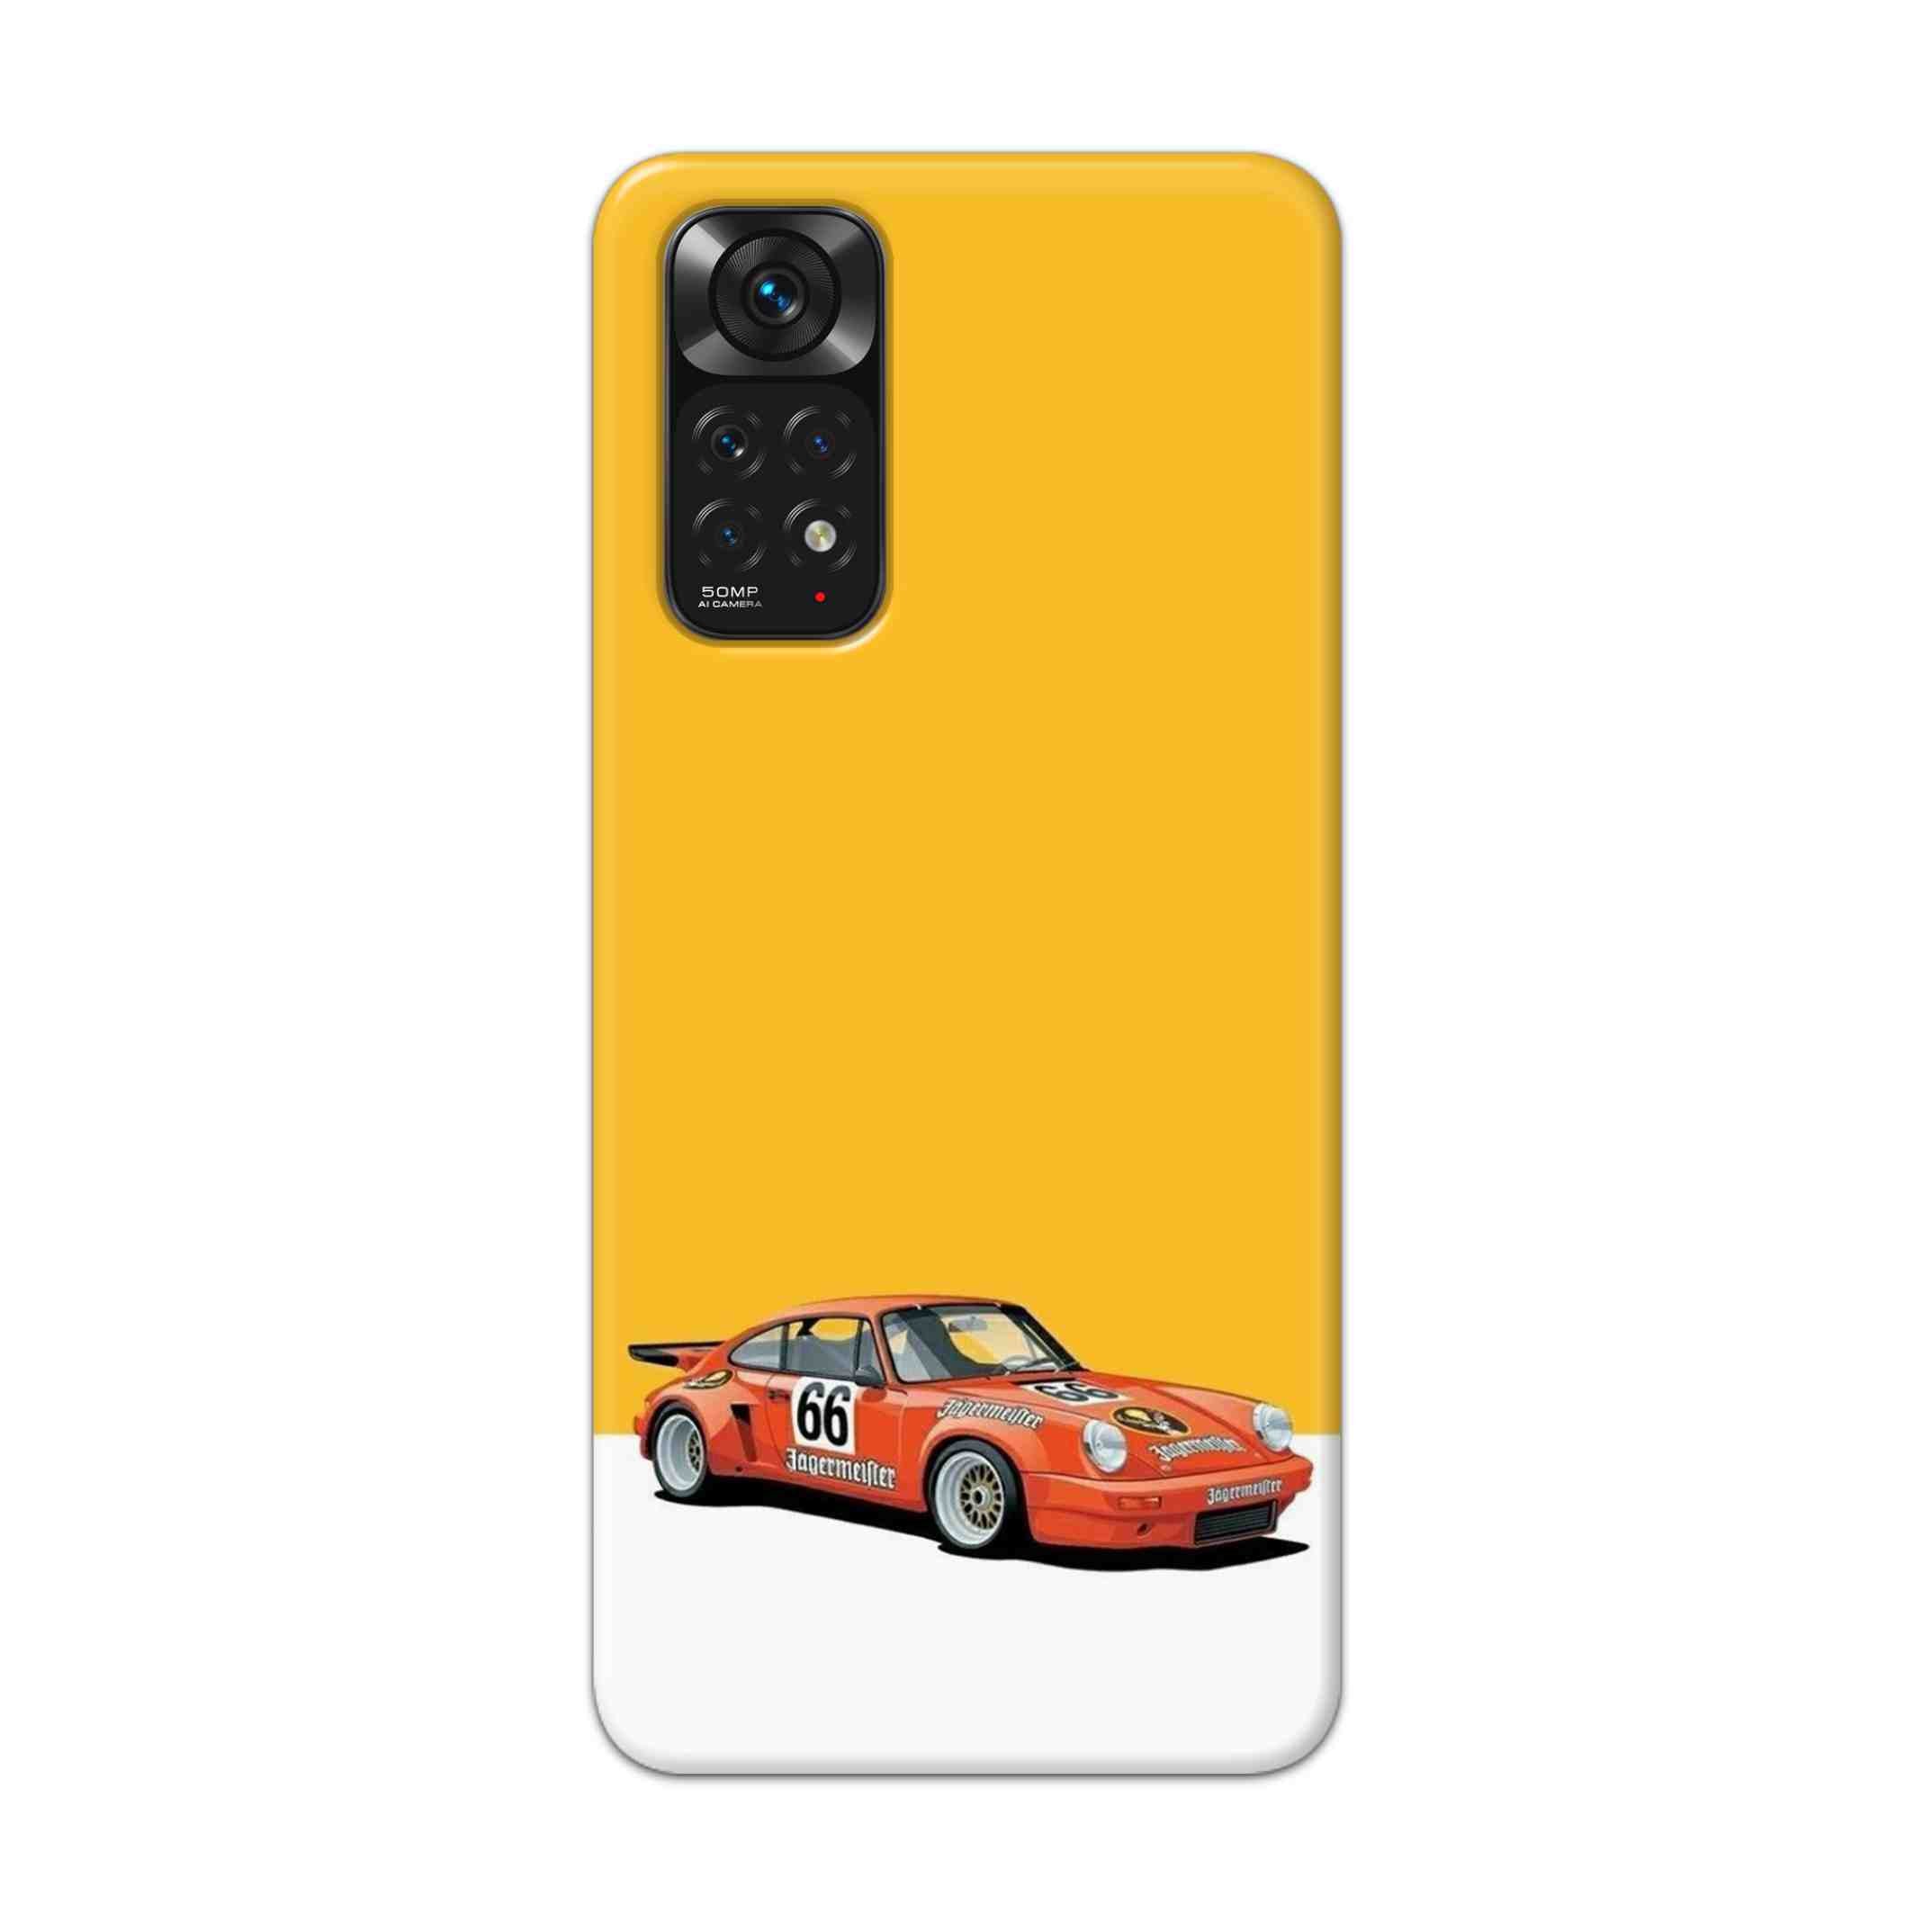 Buy Porche Hard Back Mobile Phone Case Cover For Redmi Note 11 Online